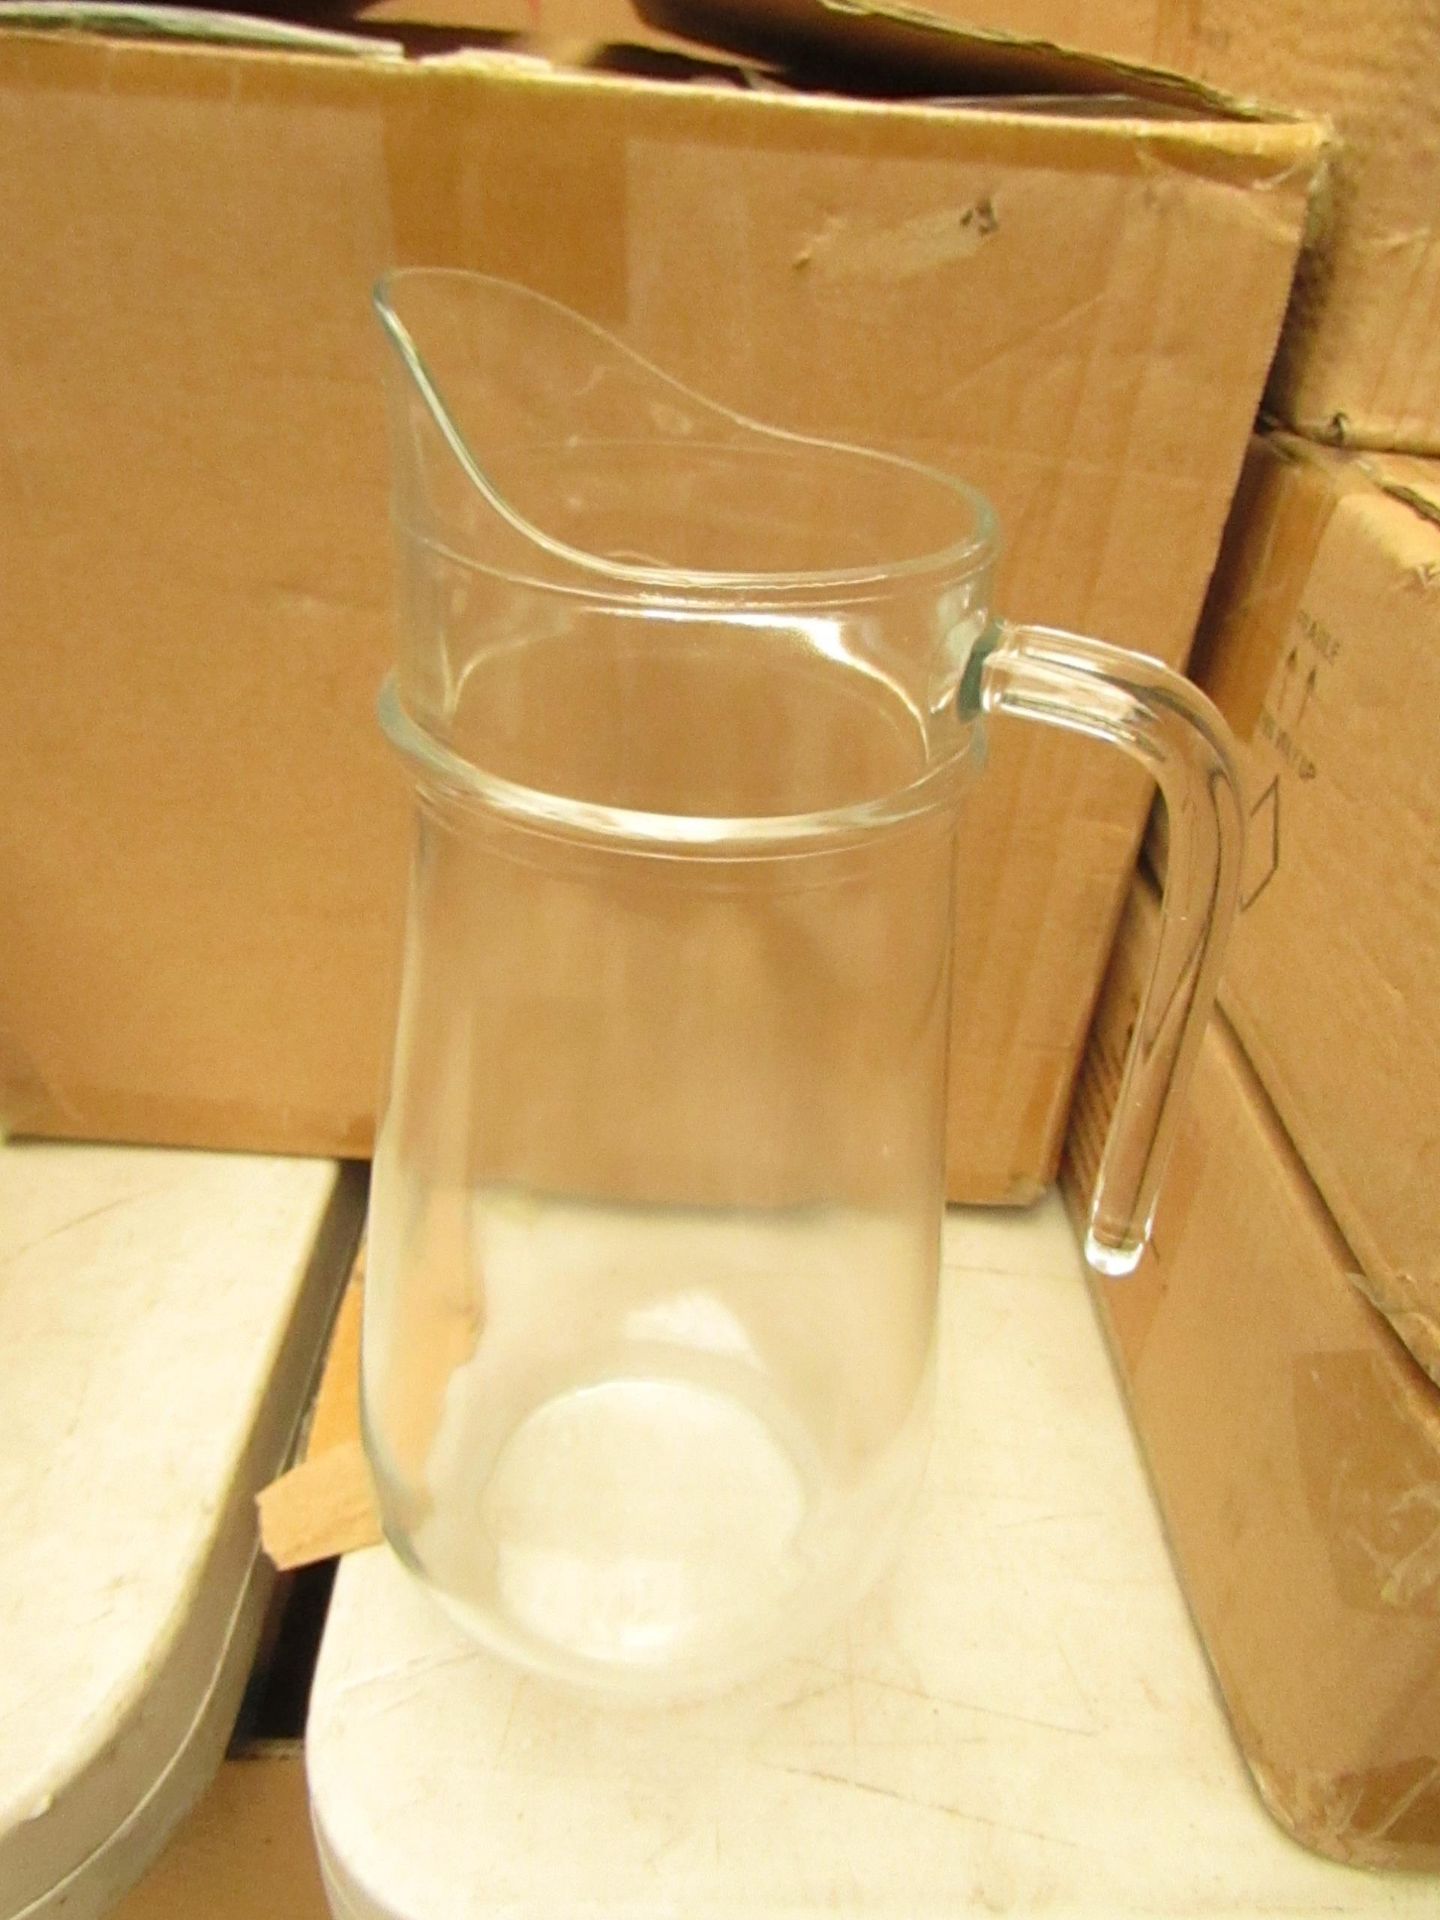 2x Glass Jugs - Good Condition.